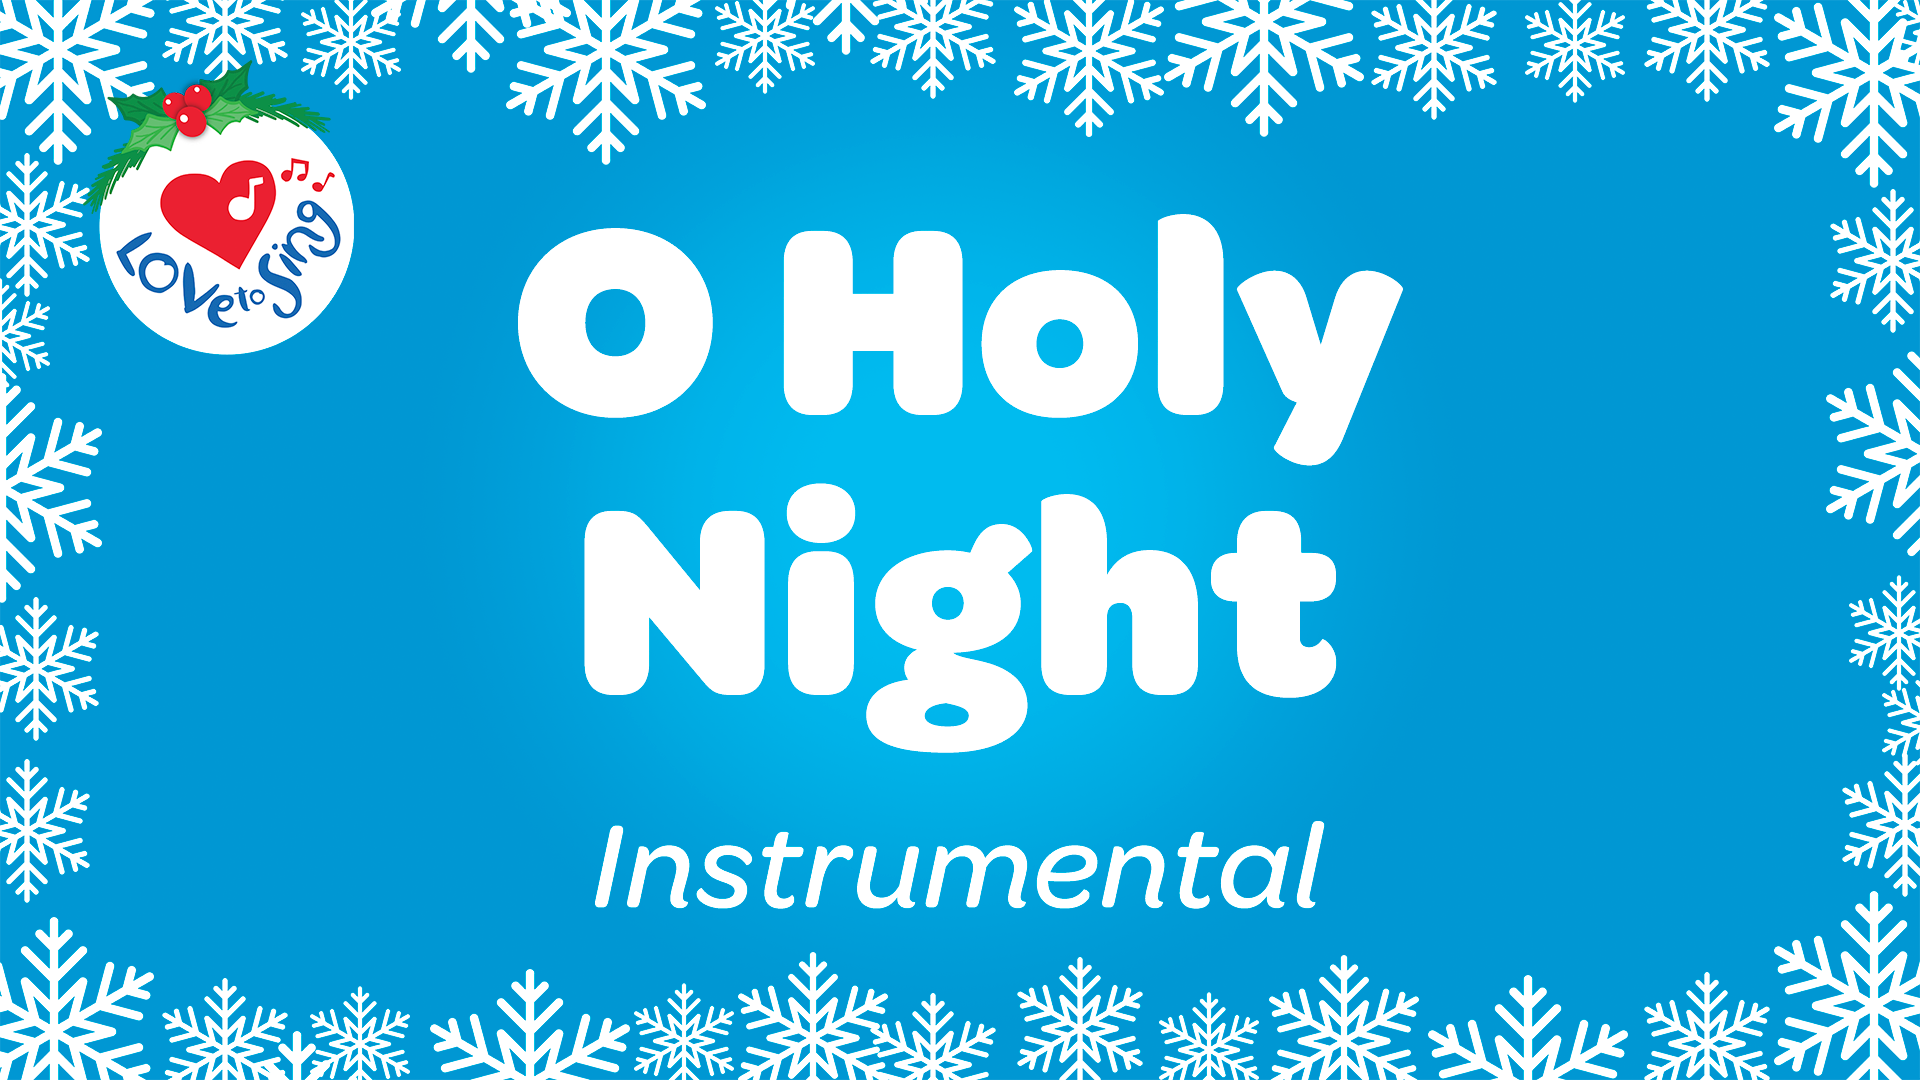 Oh Holy Night - Christmas Songs